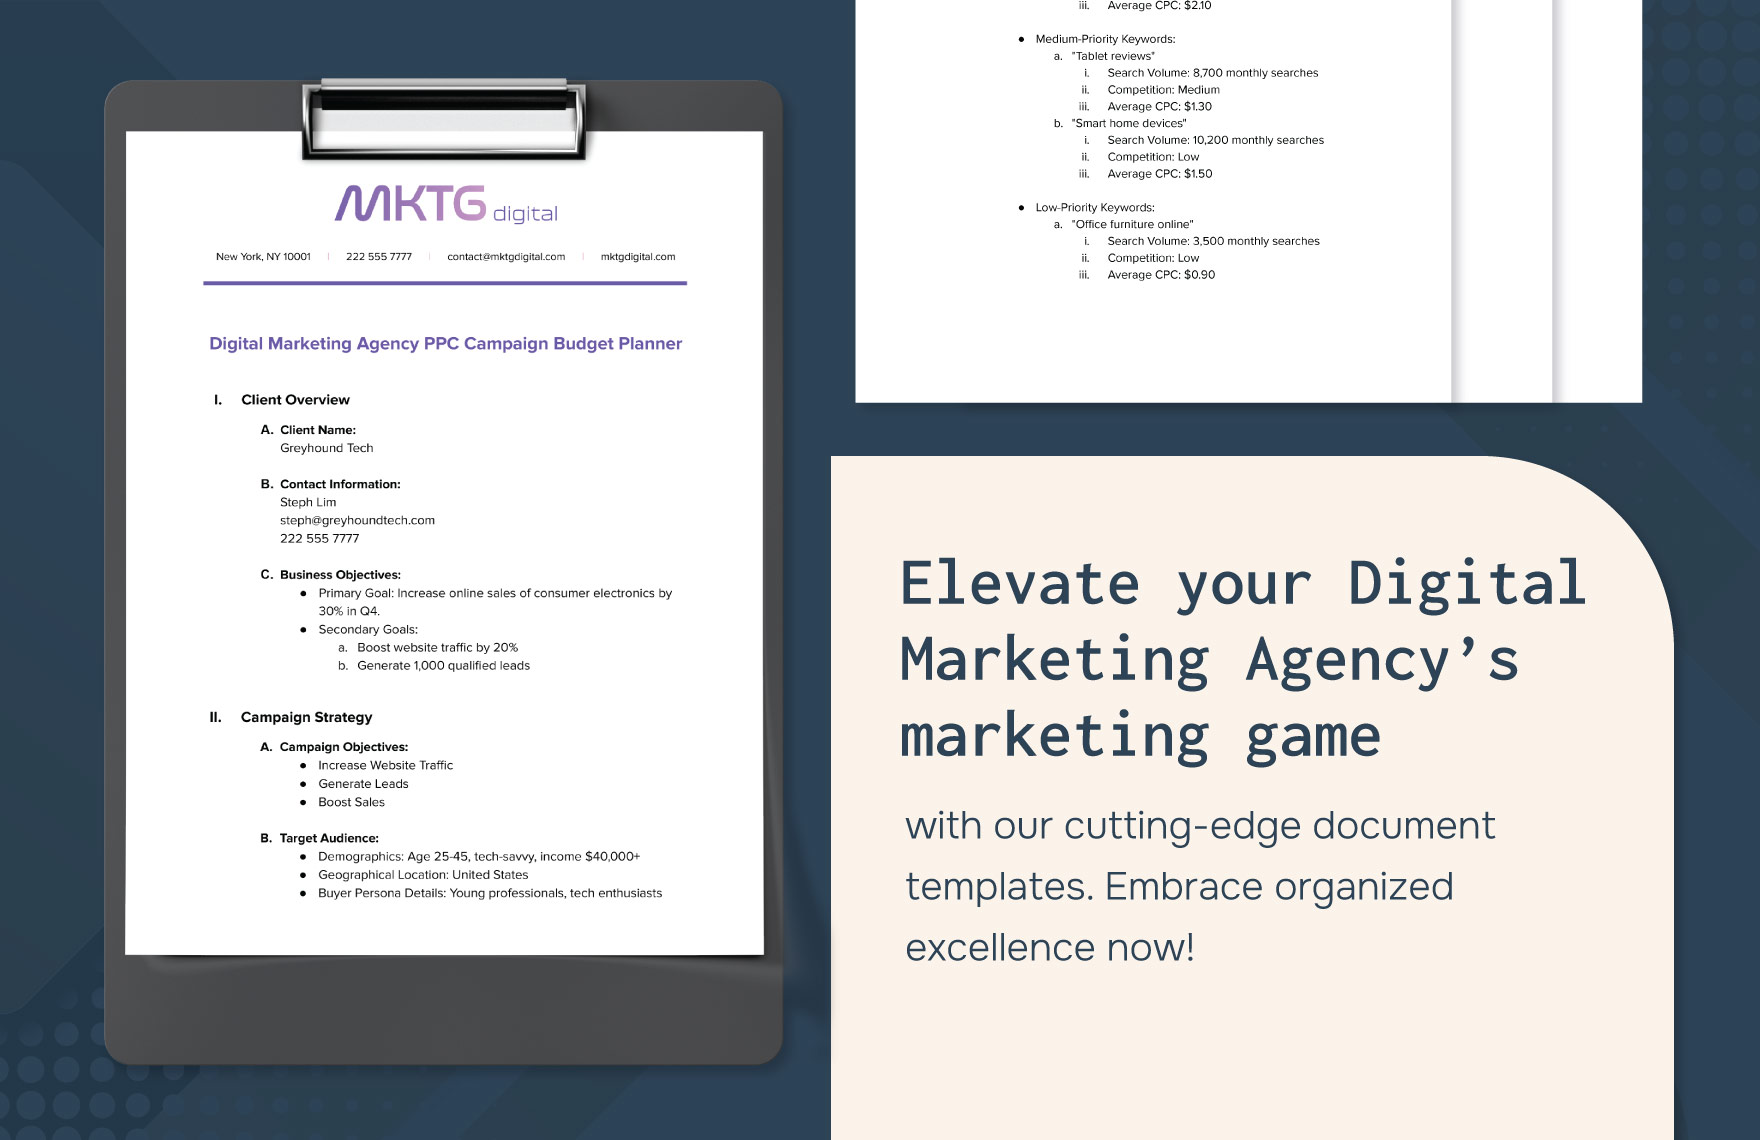 Digital Marketing Agency PPC Campaign Budget Planner Template